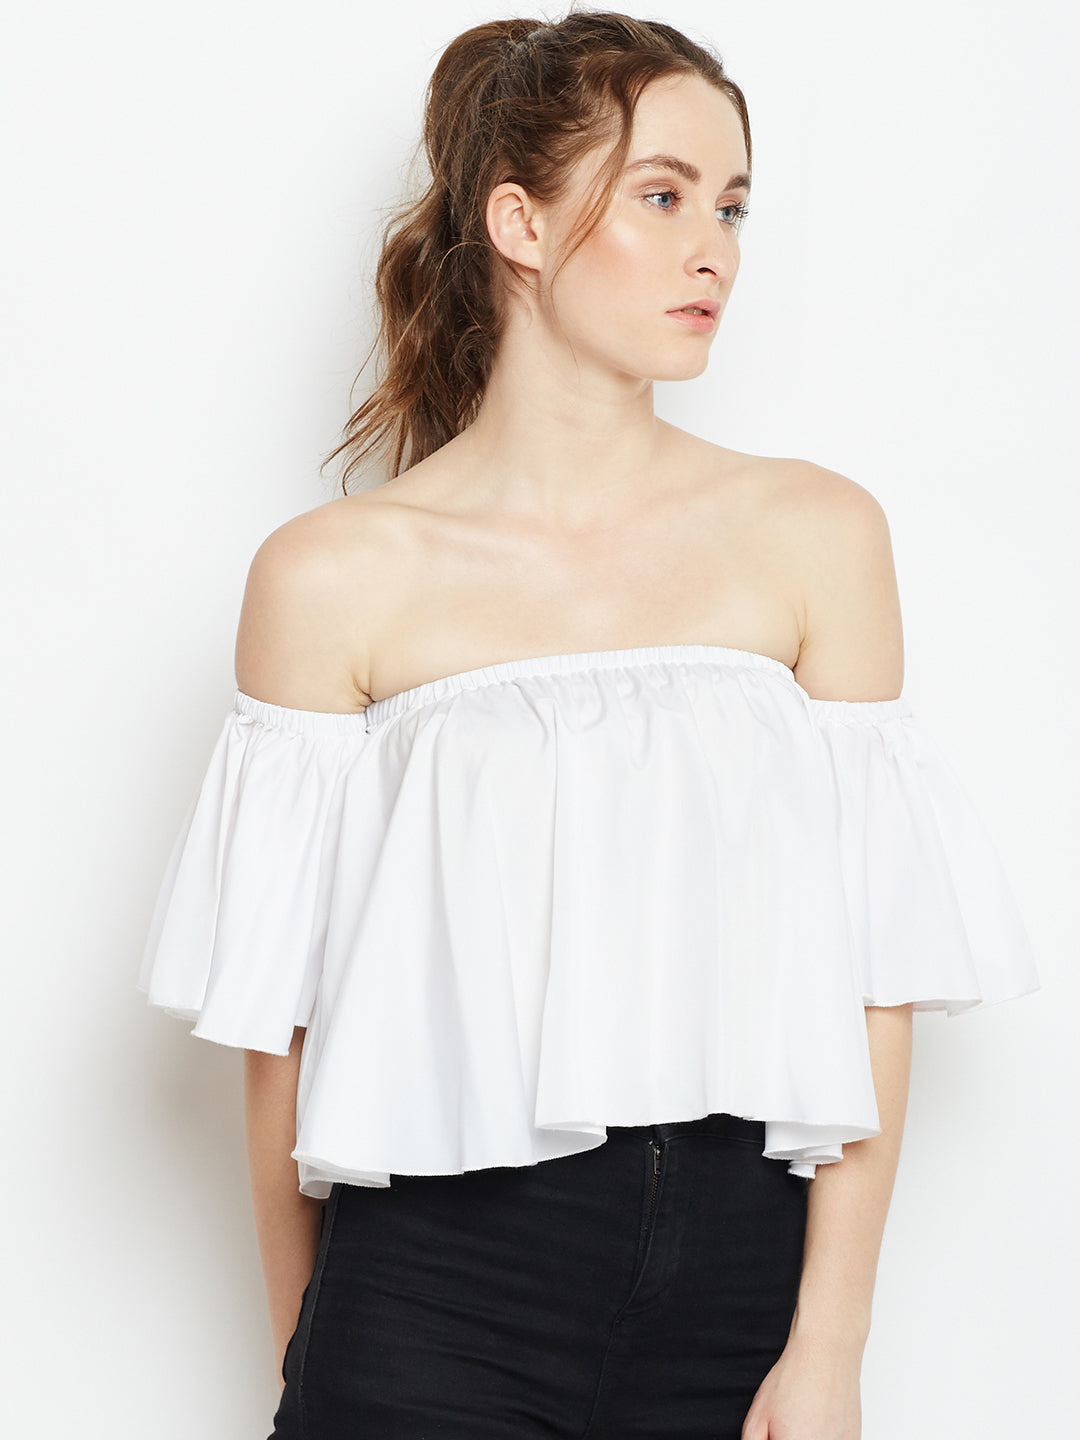 Buy online Girls Shoulder Strap Top from tops & tees for Women by Pp Trends  for ₹400 at 60% off